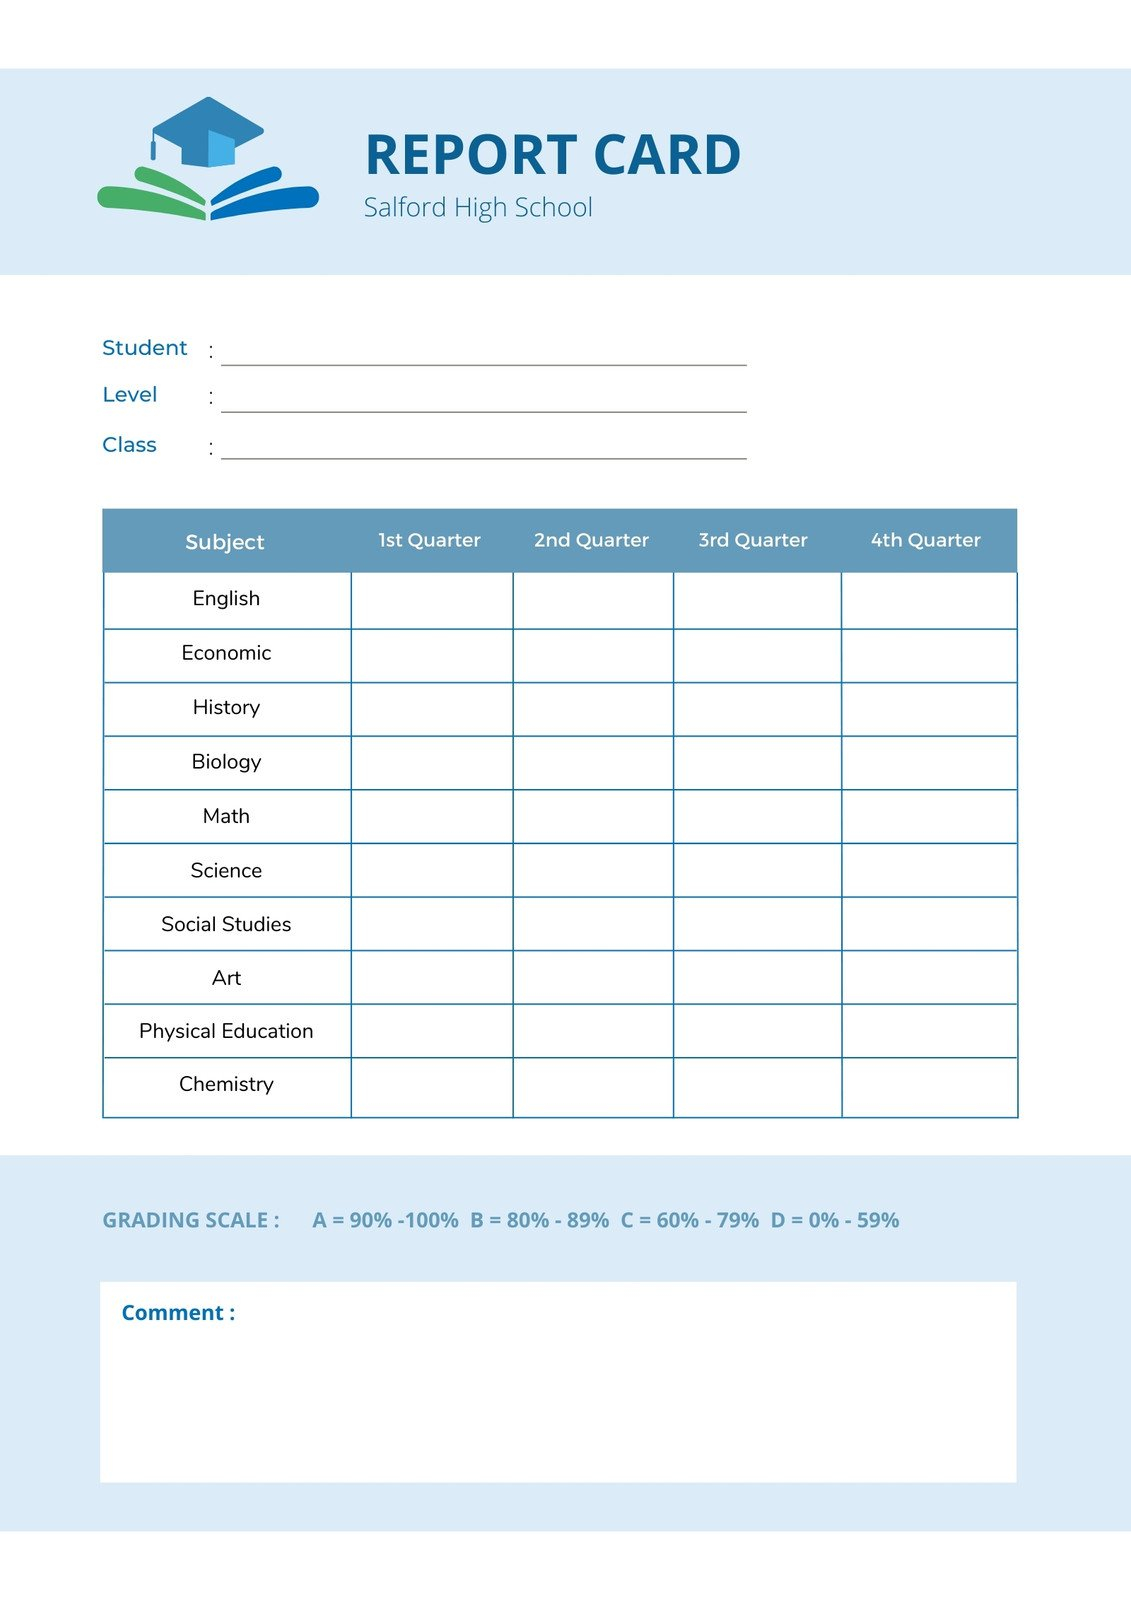 Free, printable, customizable report card templates  Canva With College Report Card Template